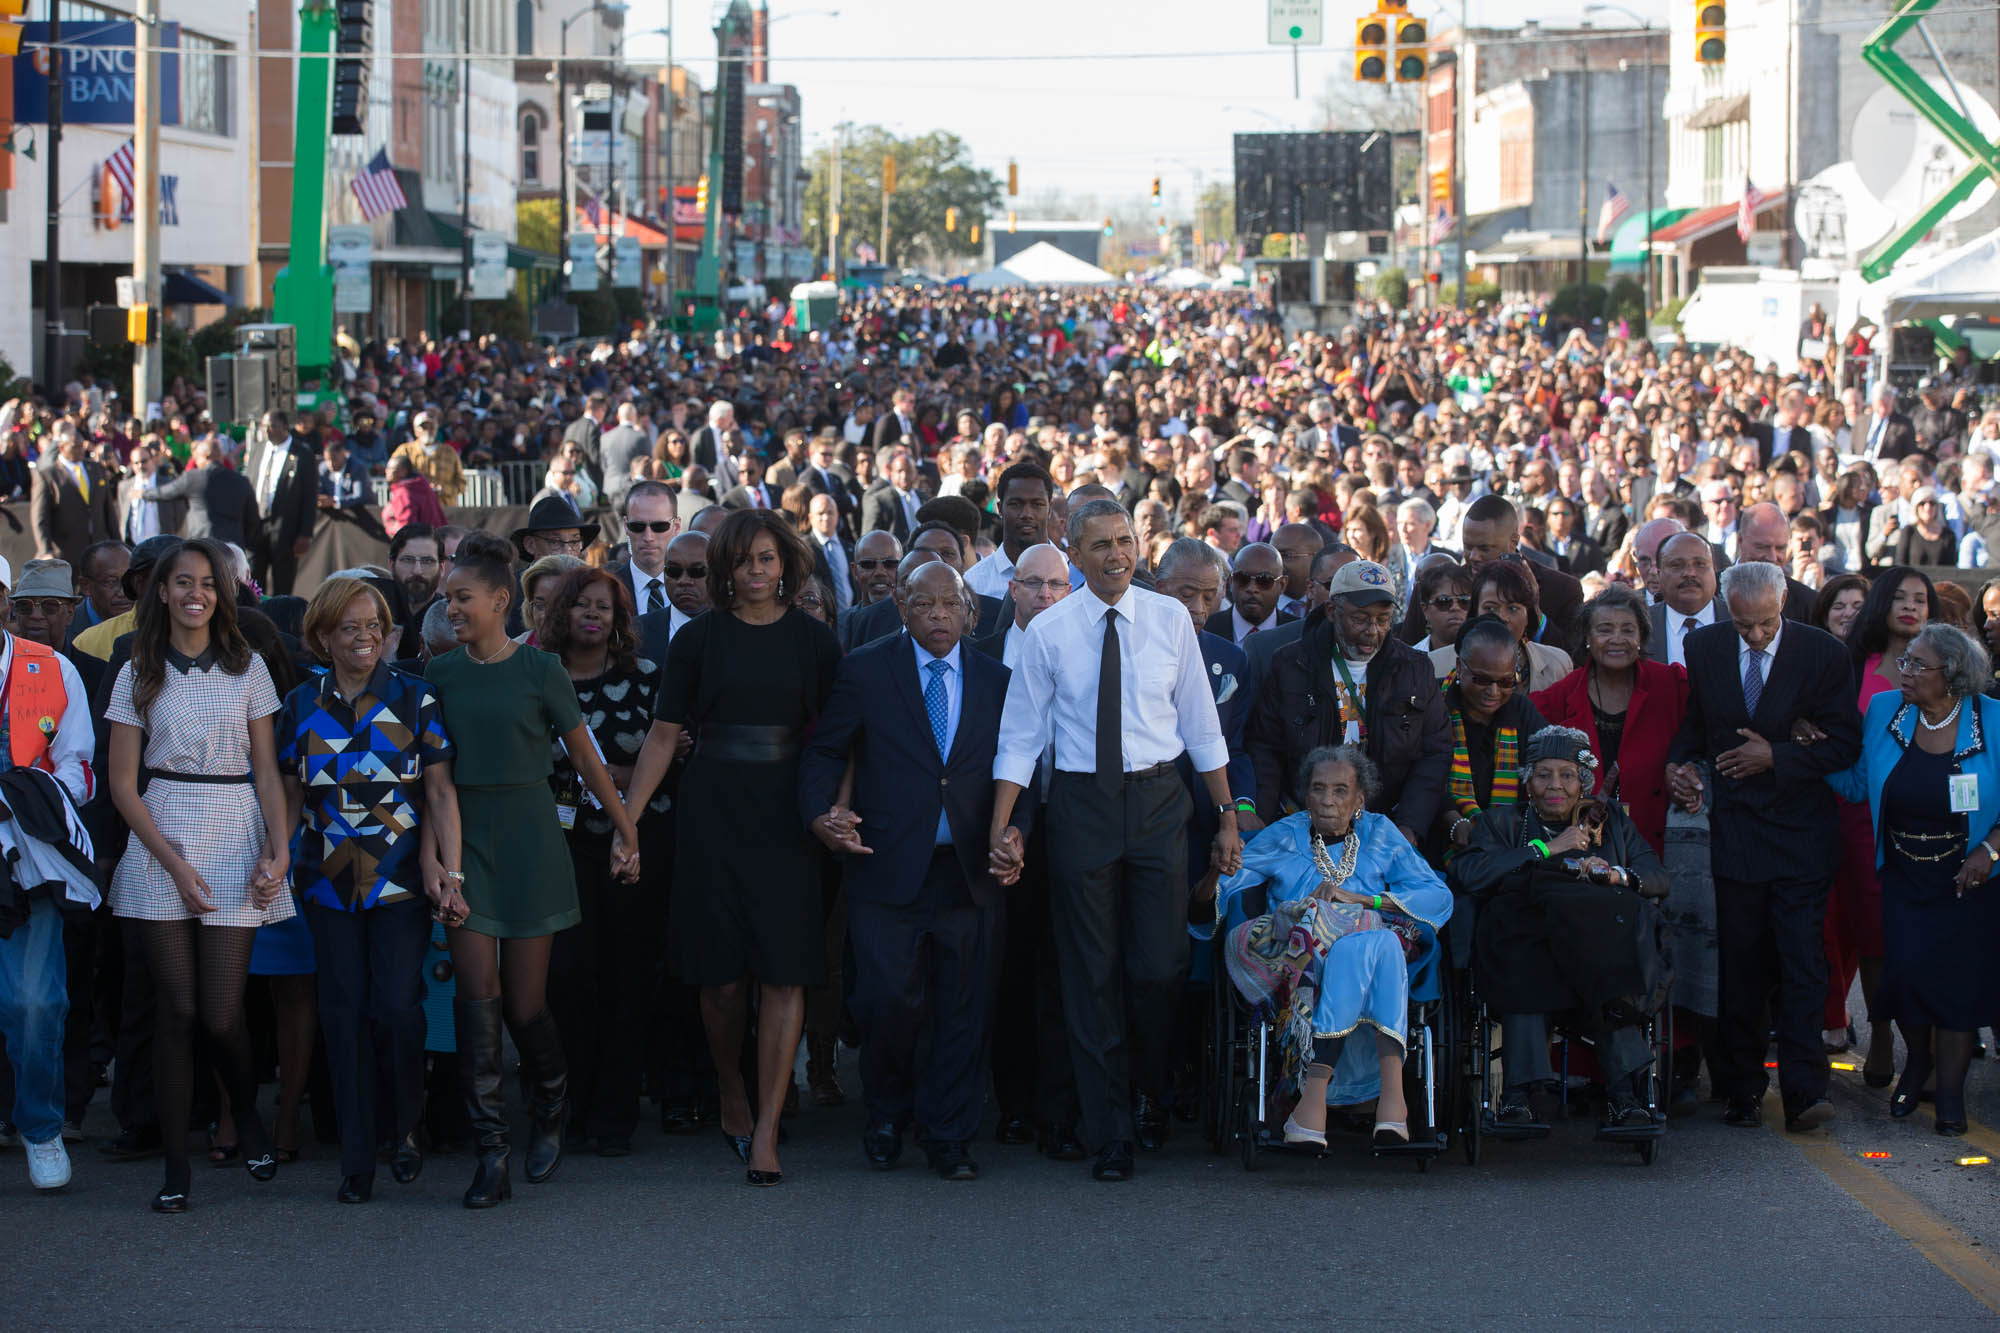 The First Family waits with former President George W. Bush, former First Lady Laura Bush prior to the walking across the Edmund Pettus Bridge